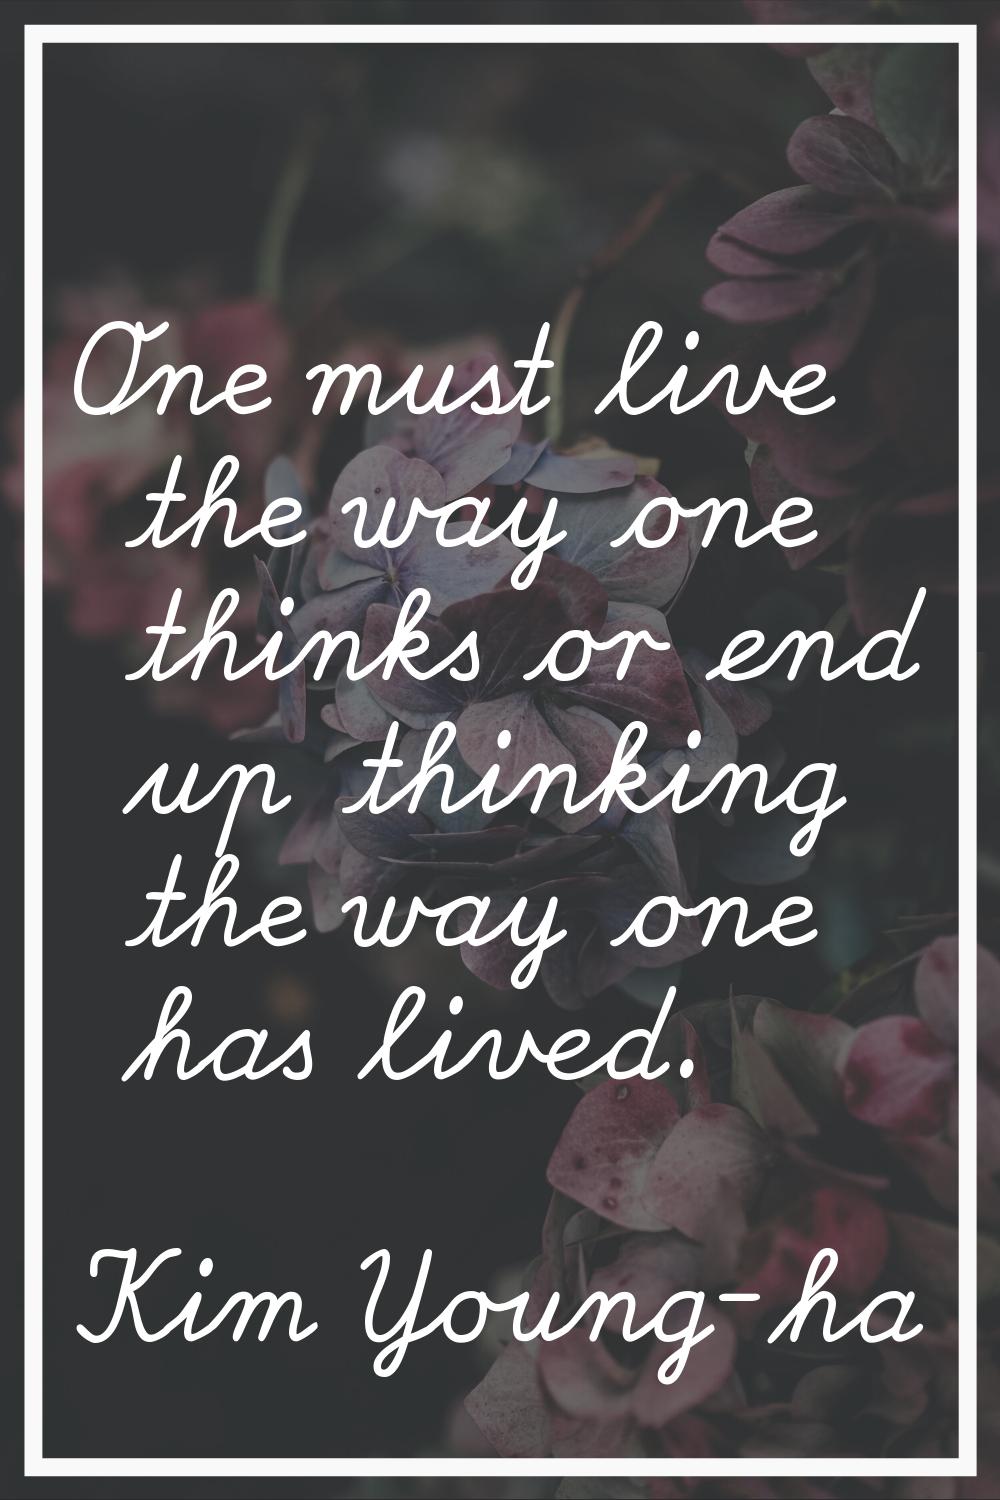 One must live the way one thinks or end up thinking the way one has lived.